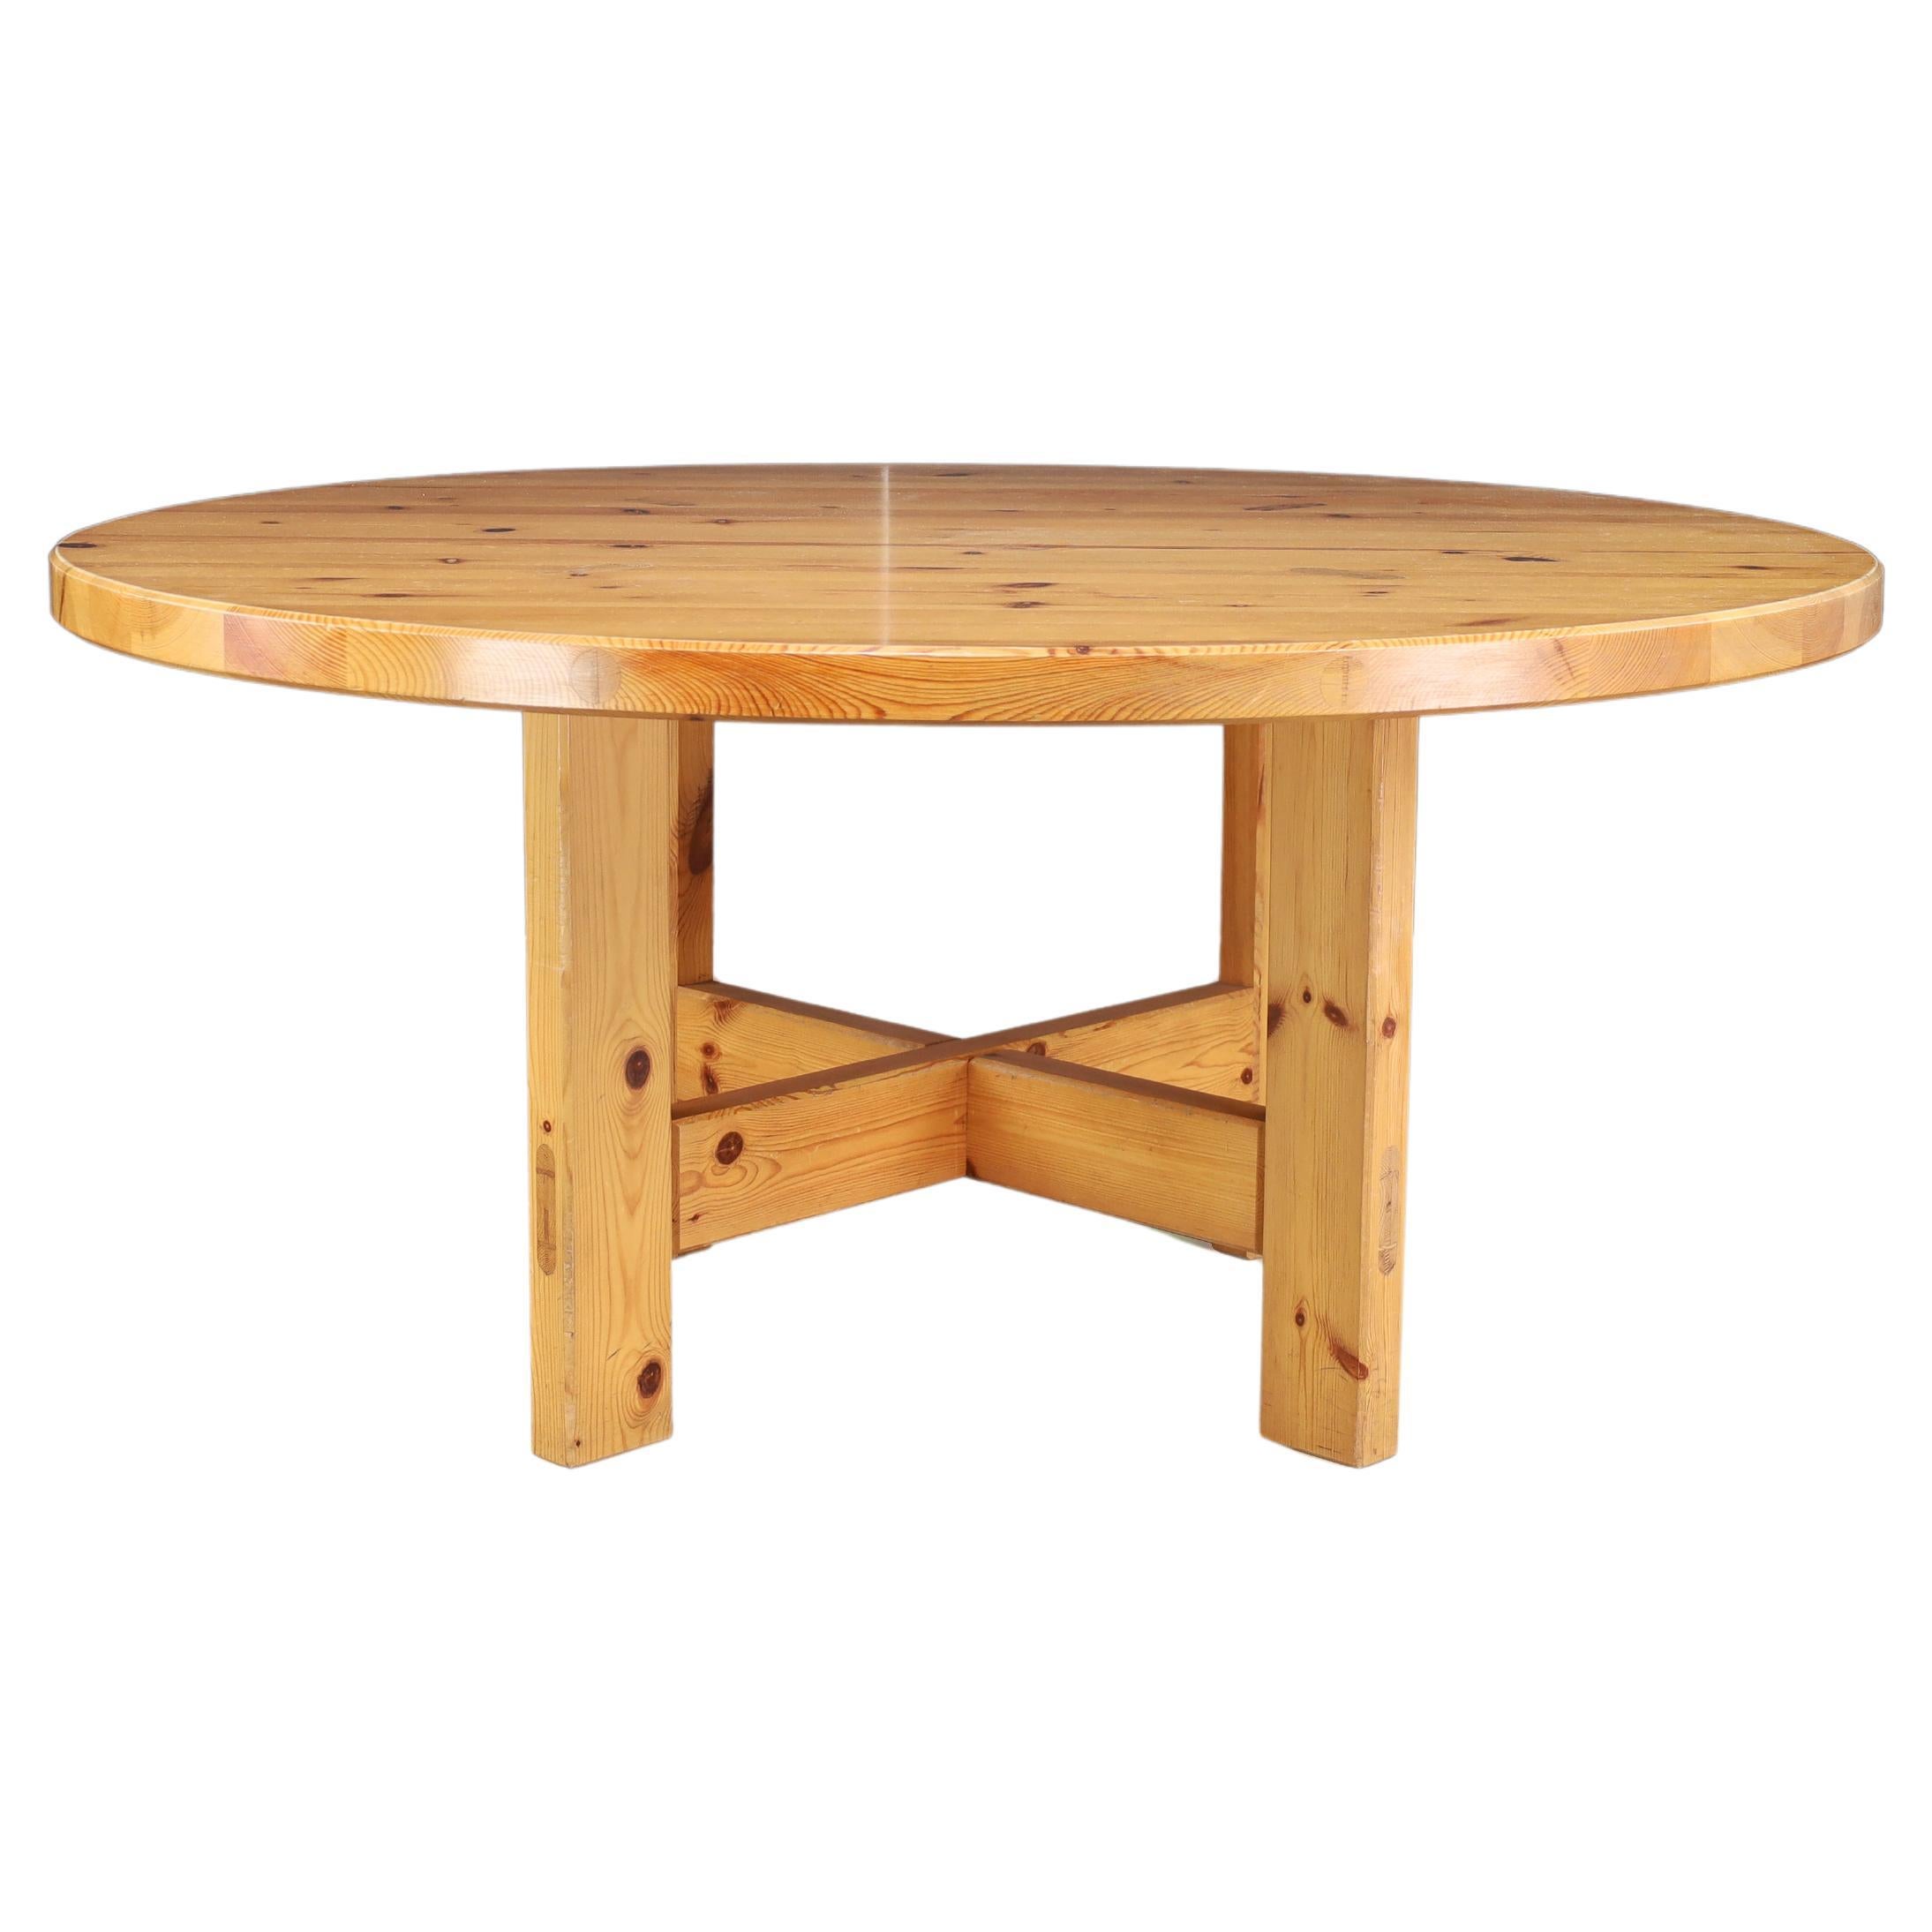 Roland Wilhelmsson for Karl Andersson & Söner Round Solid Pine Table Sweden 1970 For Sale